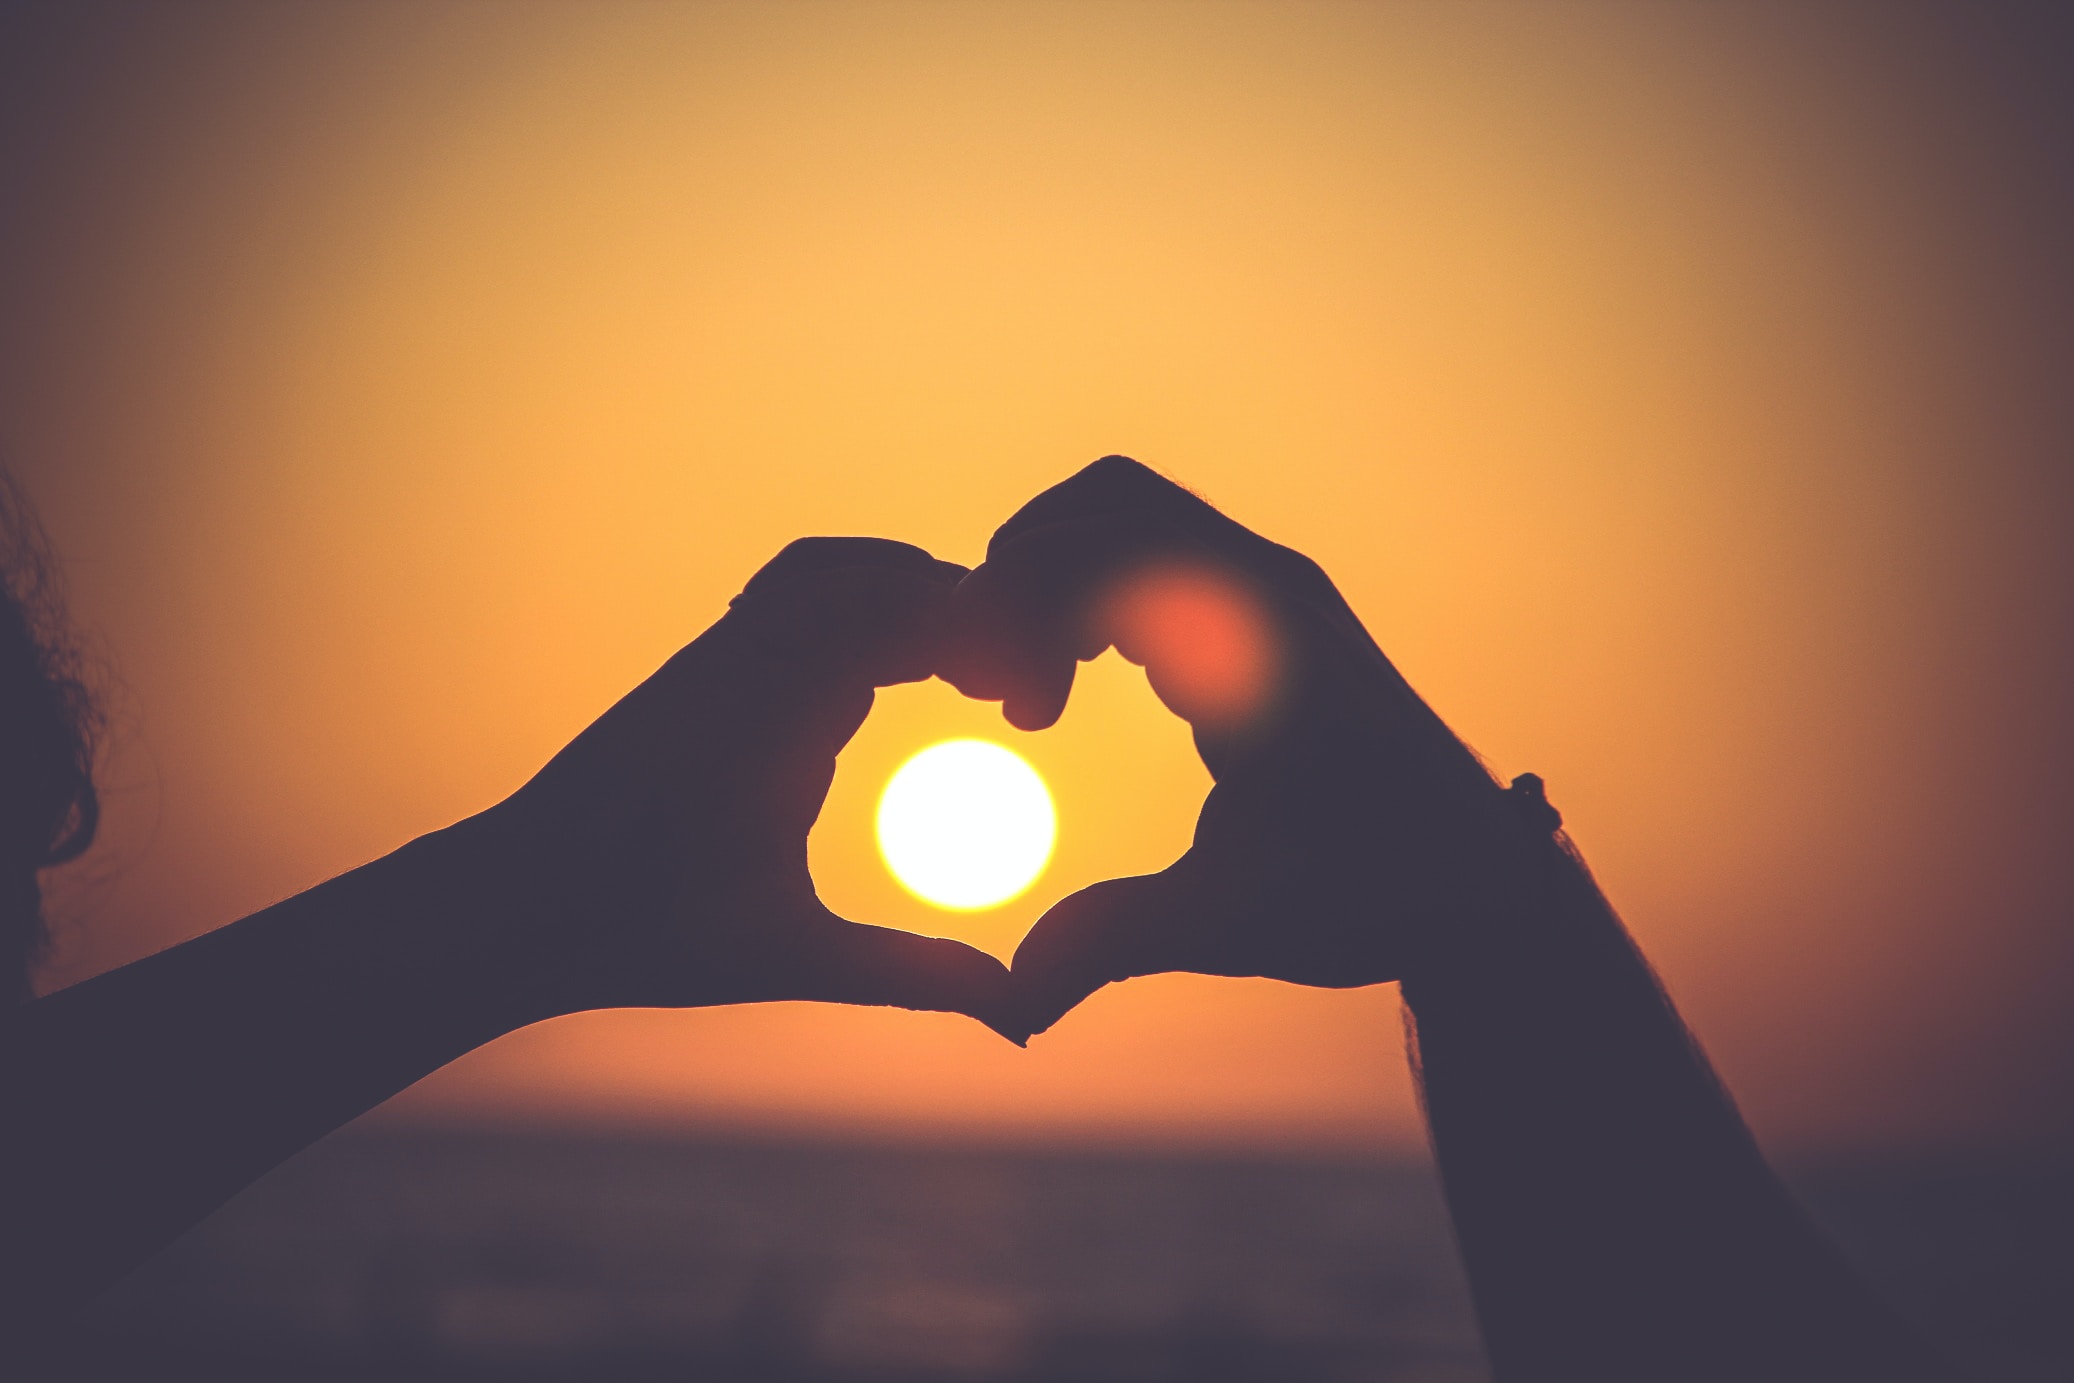 A photo of a person's hands forming a heart around the sun | Source: Unsplash